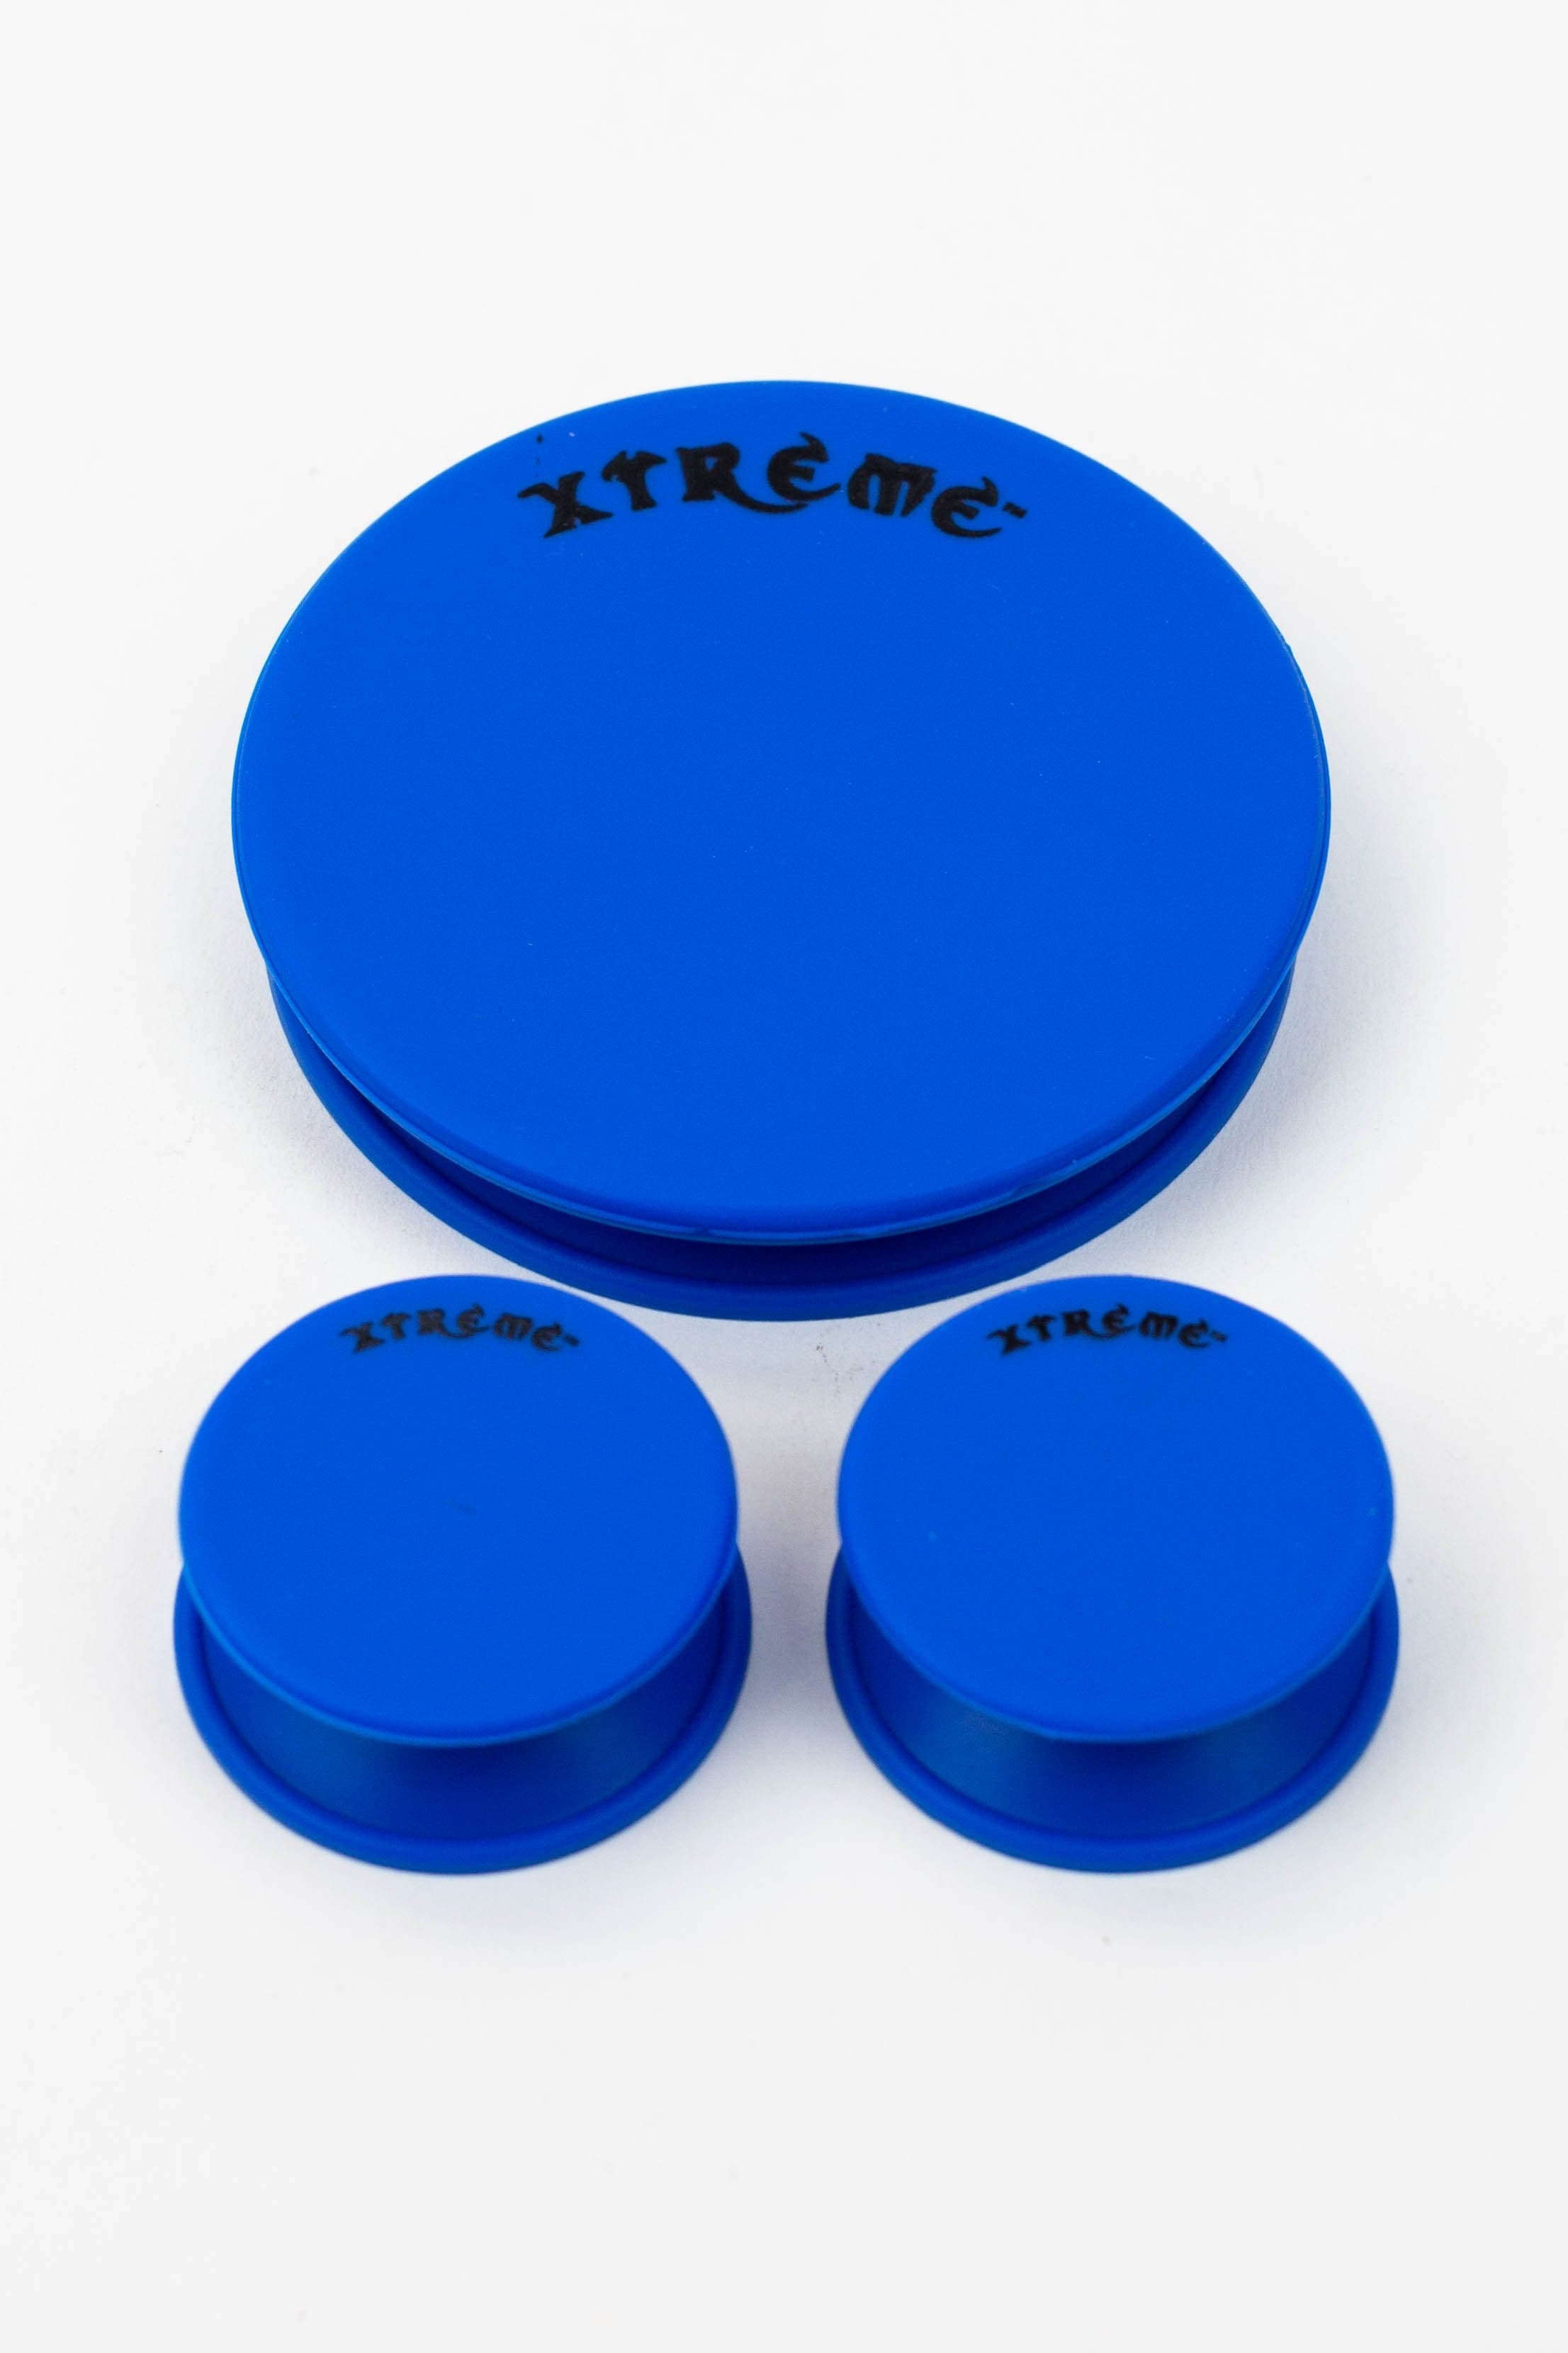 Xtreme caps universal caps for cleaning, storage, and odour proofing glass water pipes rigs and more_4